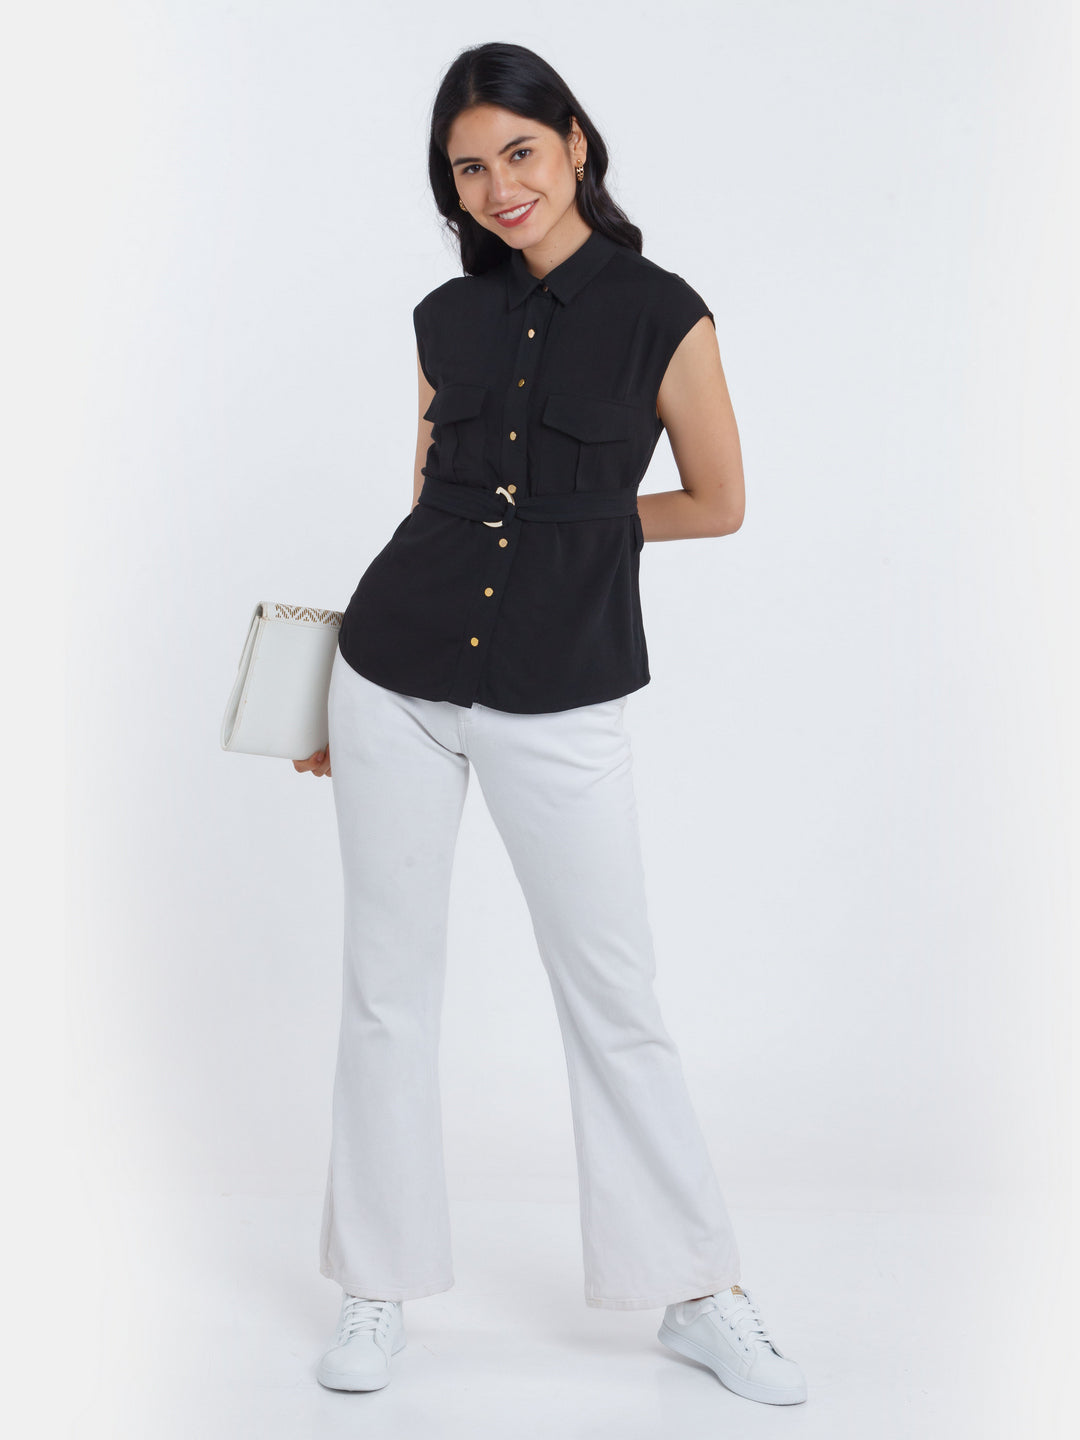 Black Solid Utility Top For Women